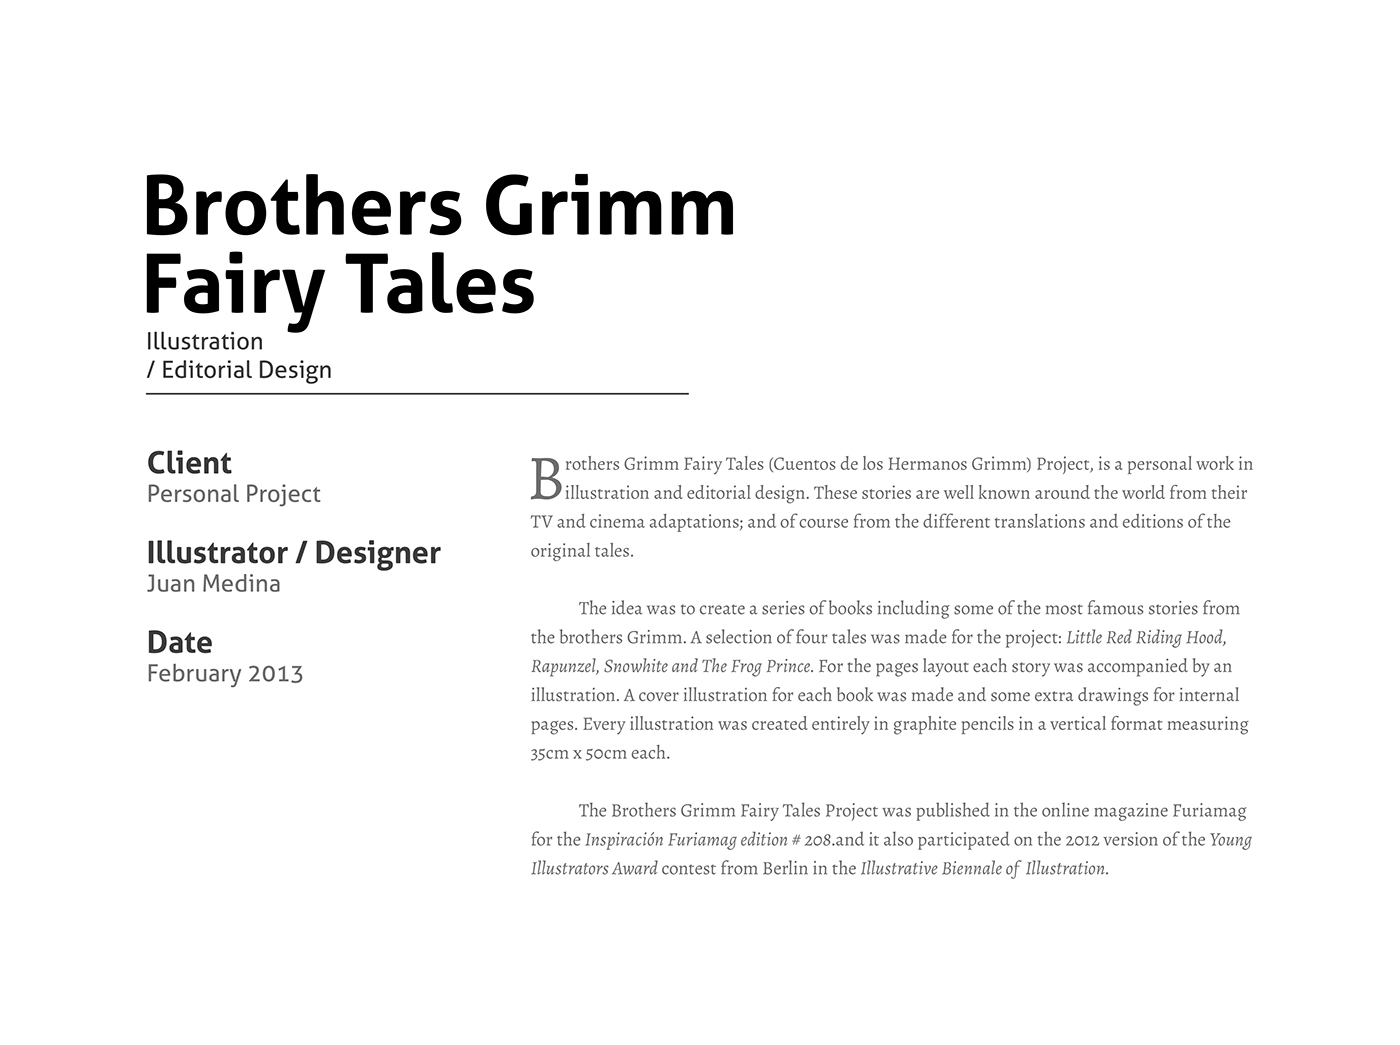 brothers grimm Editorial Illustration book illustration fairy tales